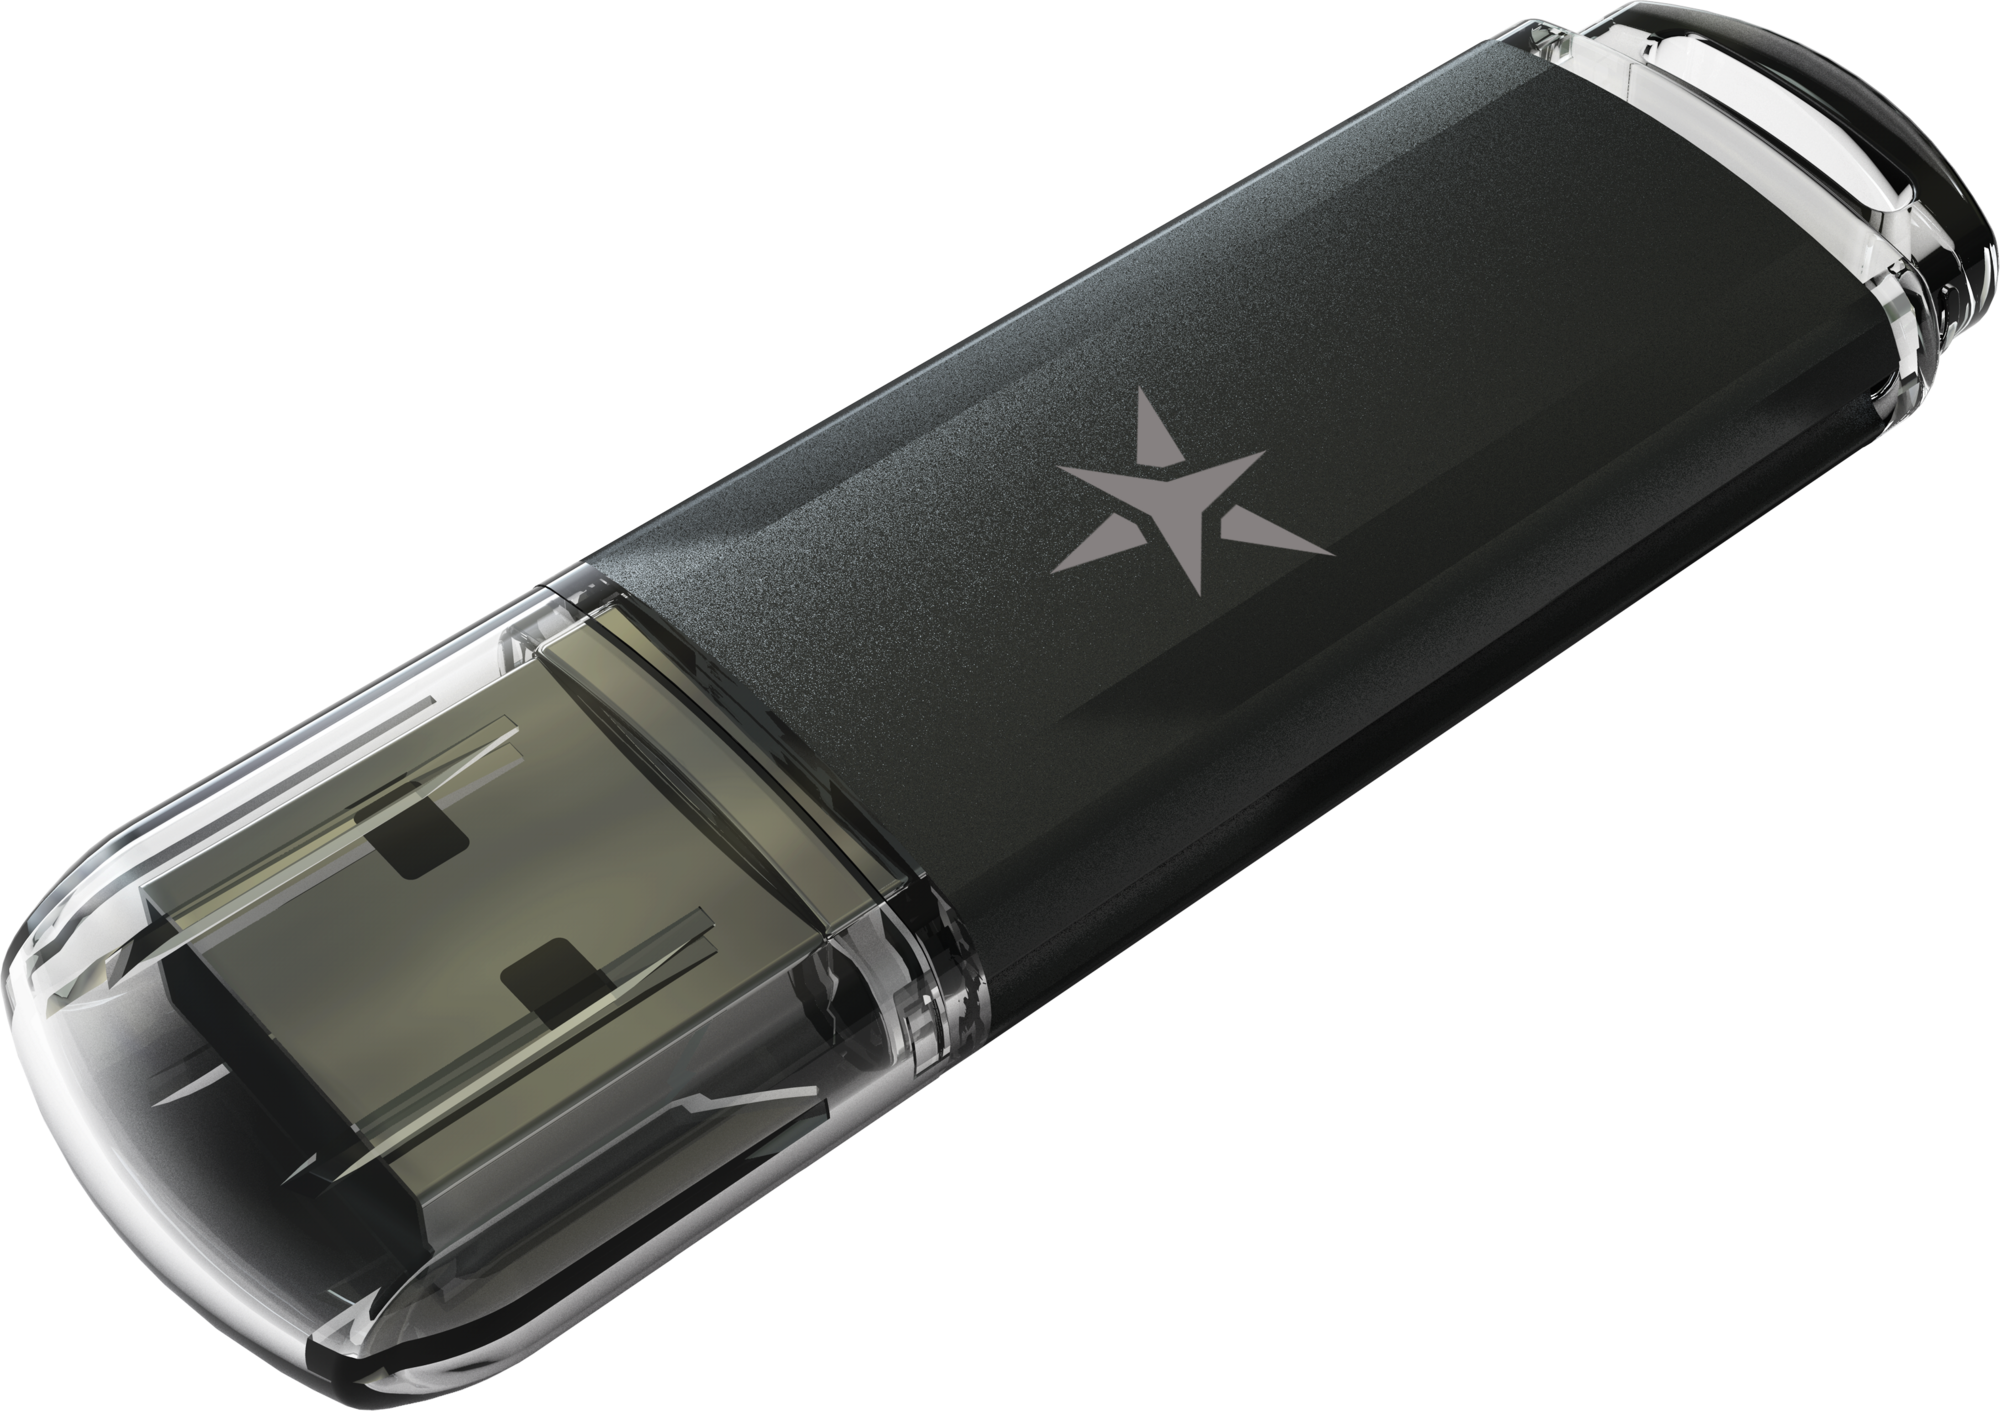 Star Drive USB 3.0 Recovery Drive